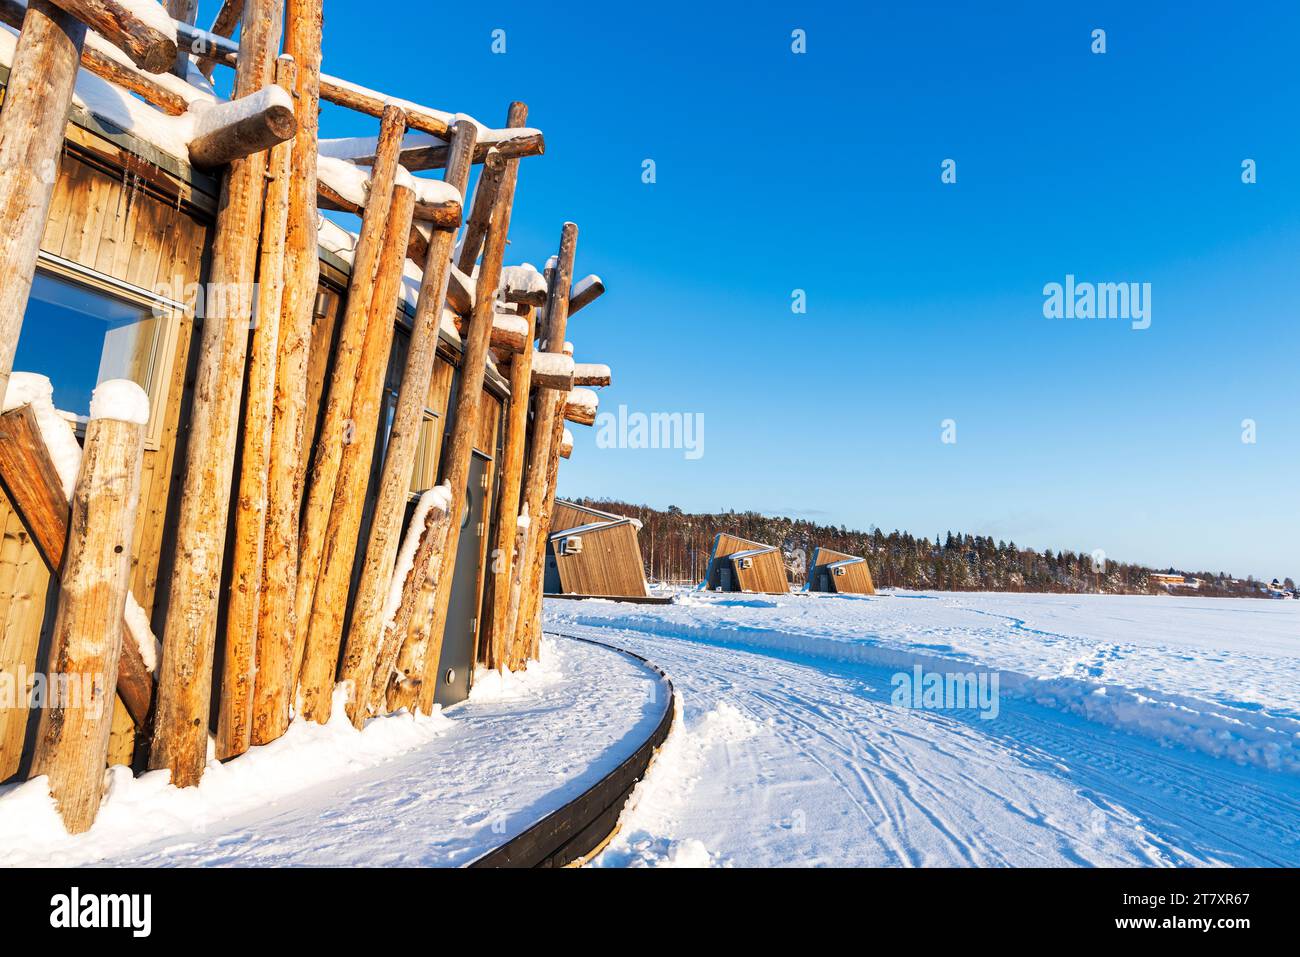 Architectural structure of Arctic Bath hotel made of logs on frozen Lule River with cutting-edge chalets in the background Stock Photo